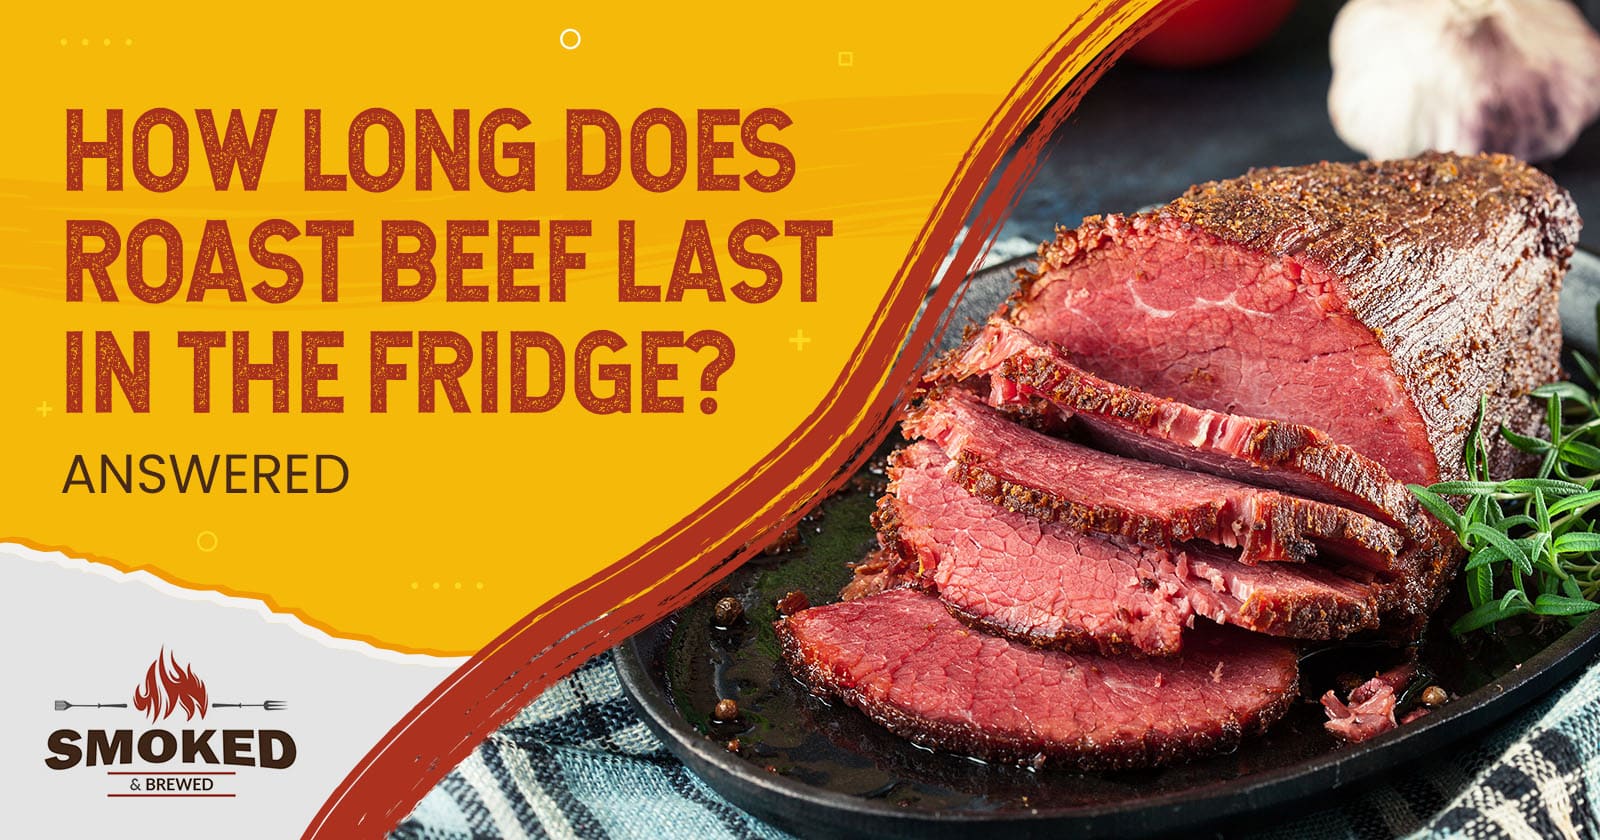 How Long Does Roast Beef Last in the Fridge? [ANSWERED]